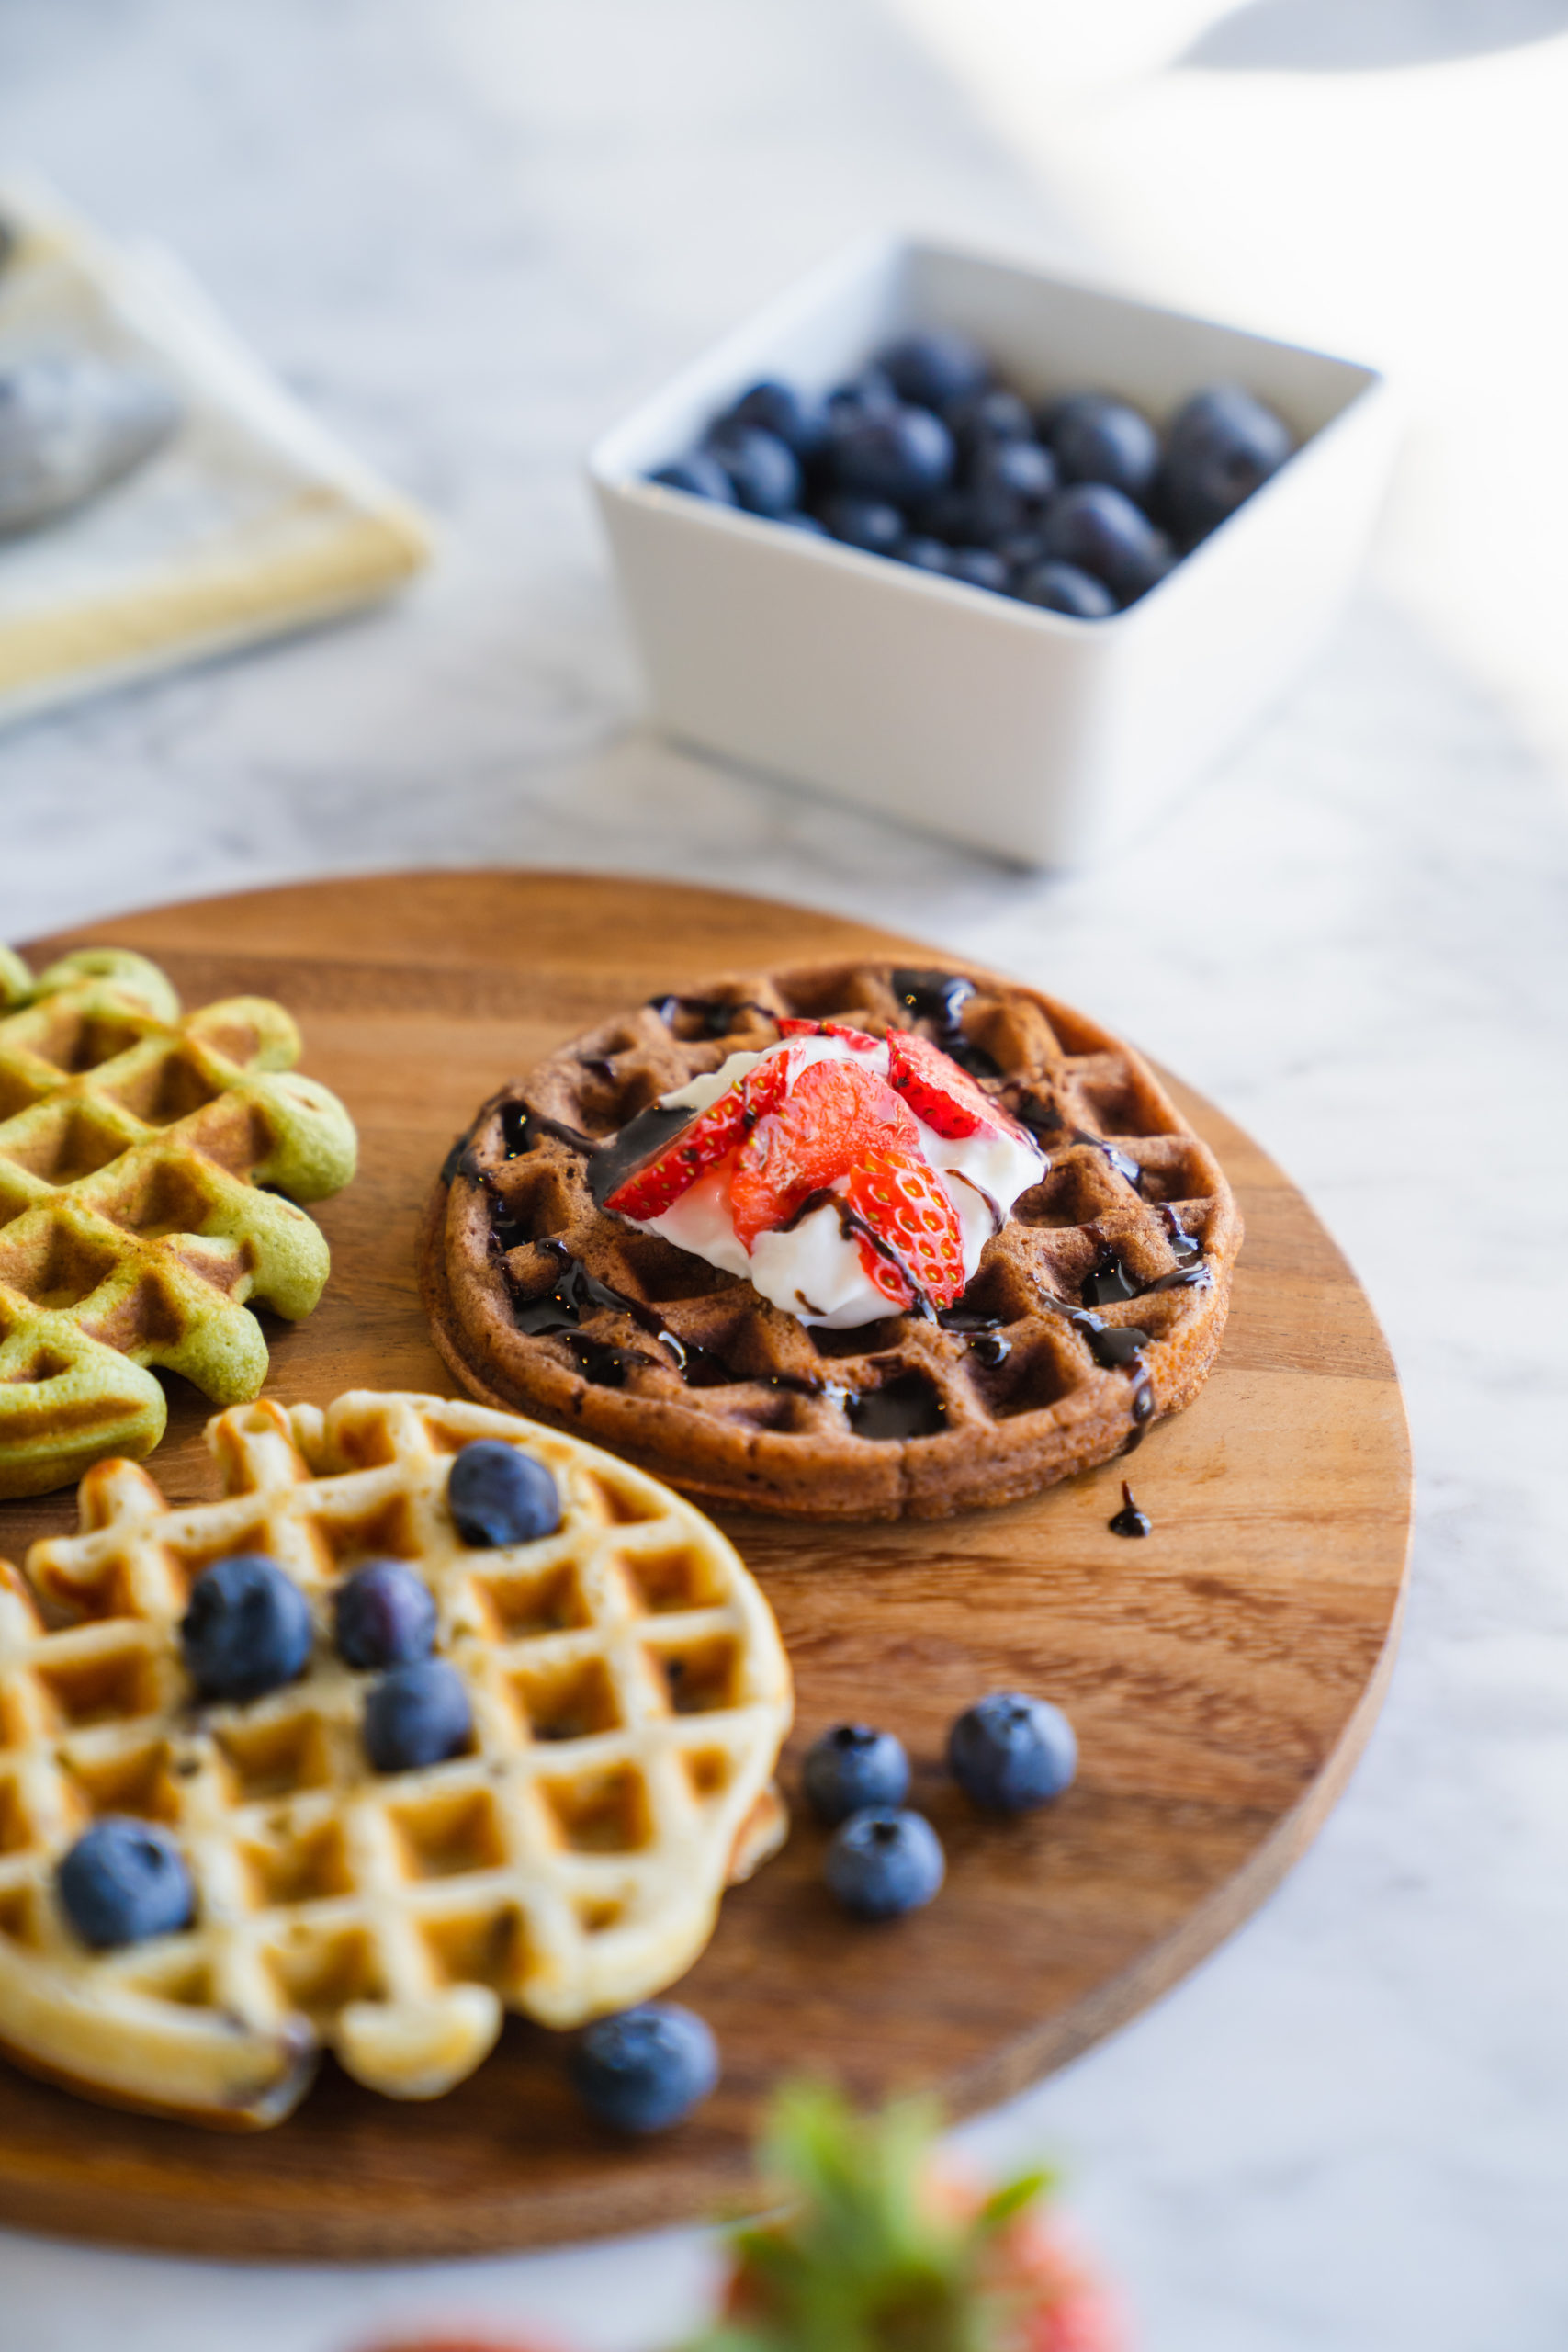 The Best Homemade Waffle Recipe (Delicious Waffles 3 Ways!)